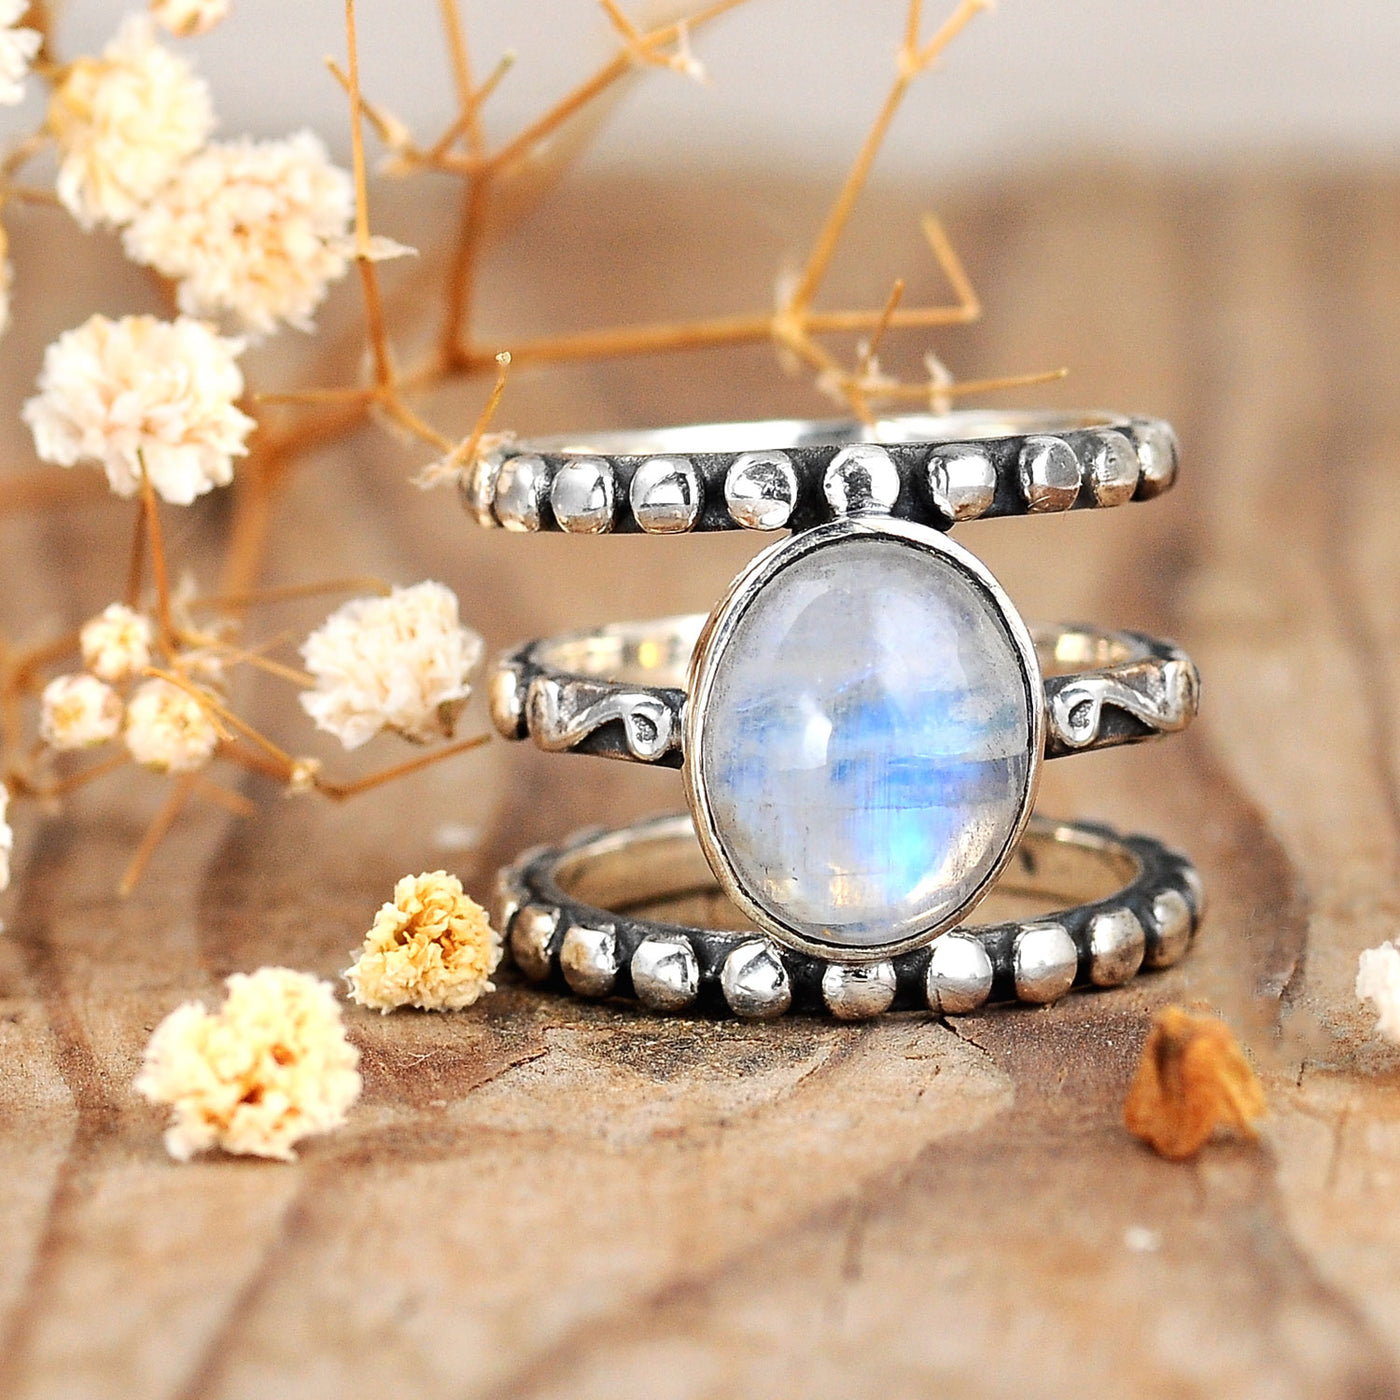 Large Rainbow Moonstone Ring Sterling Silver